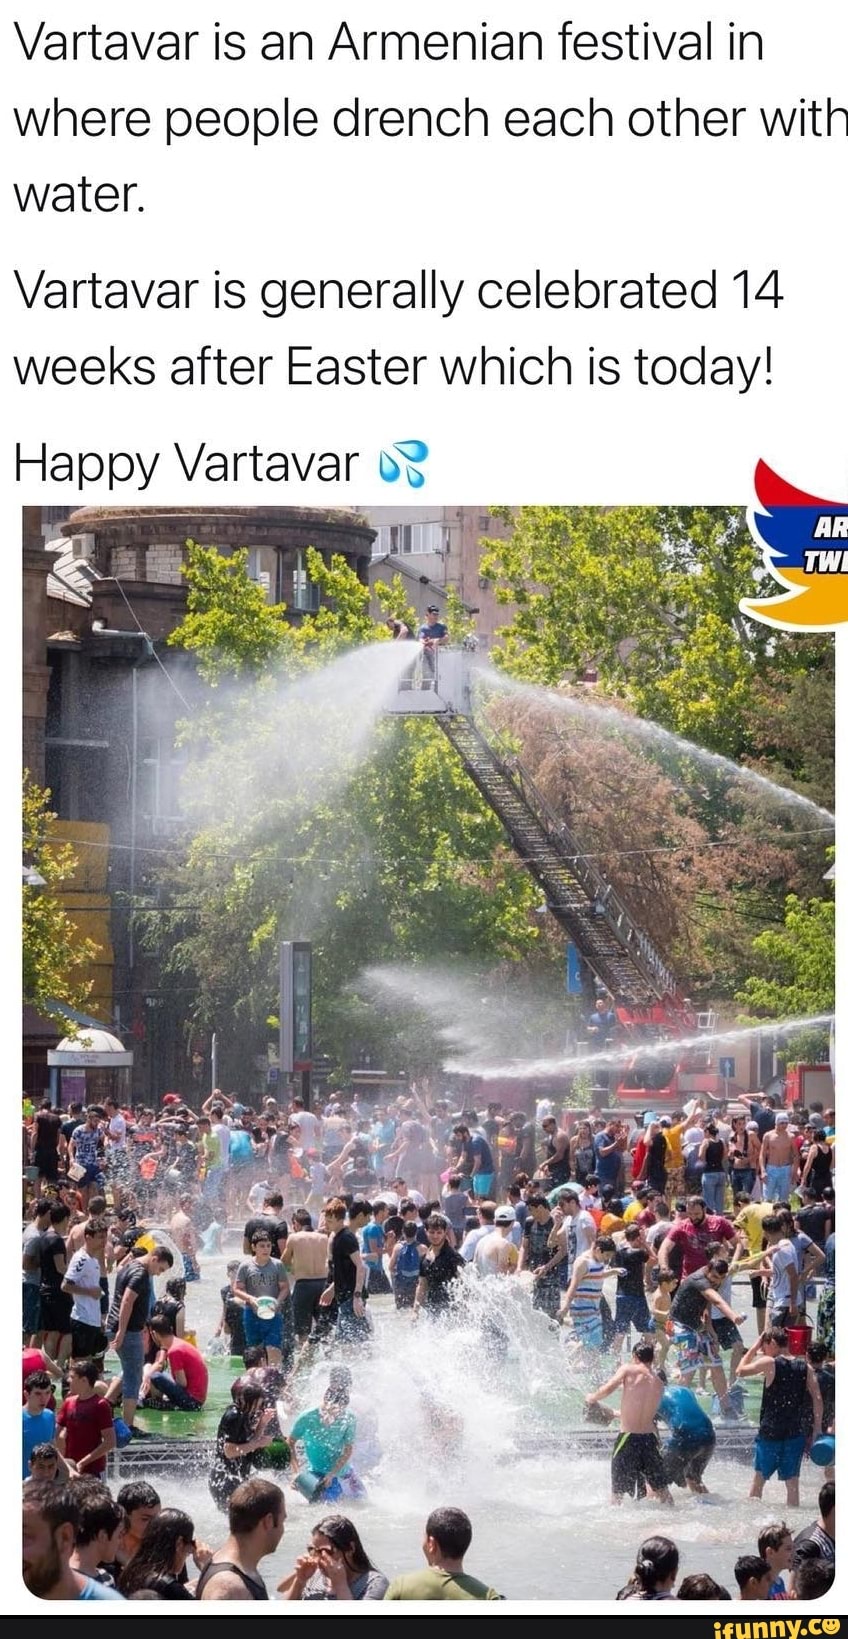 Vartavar is an Armenian festival in where people drench each other with